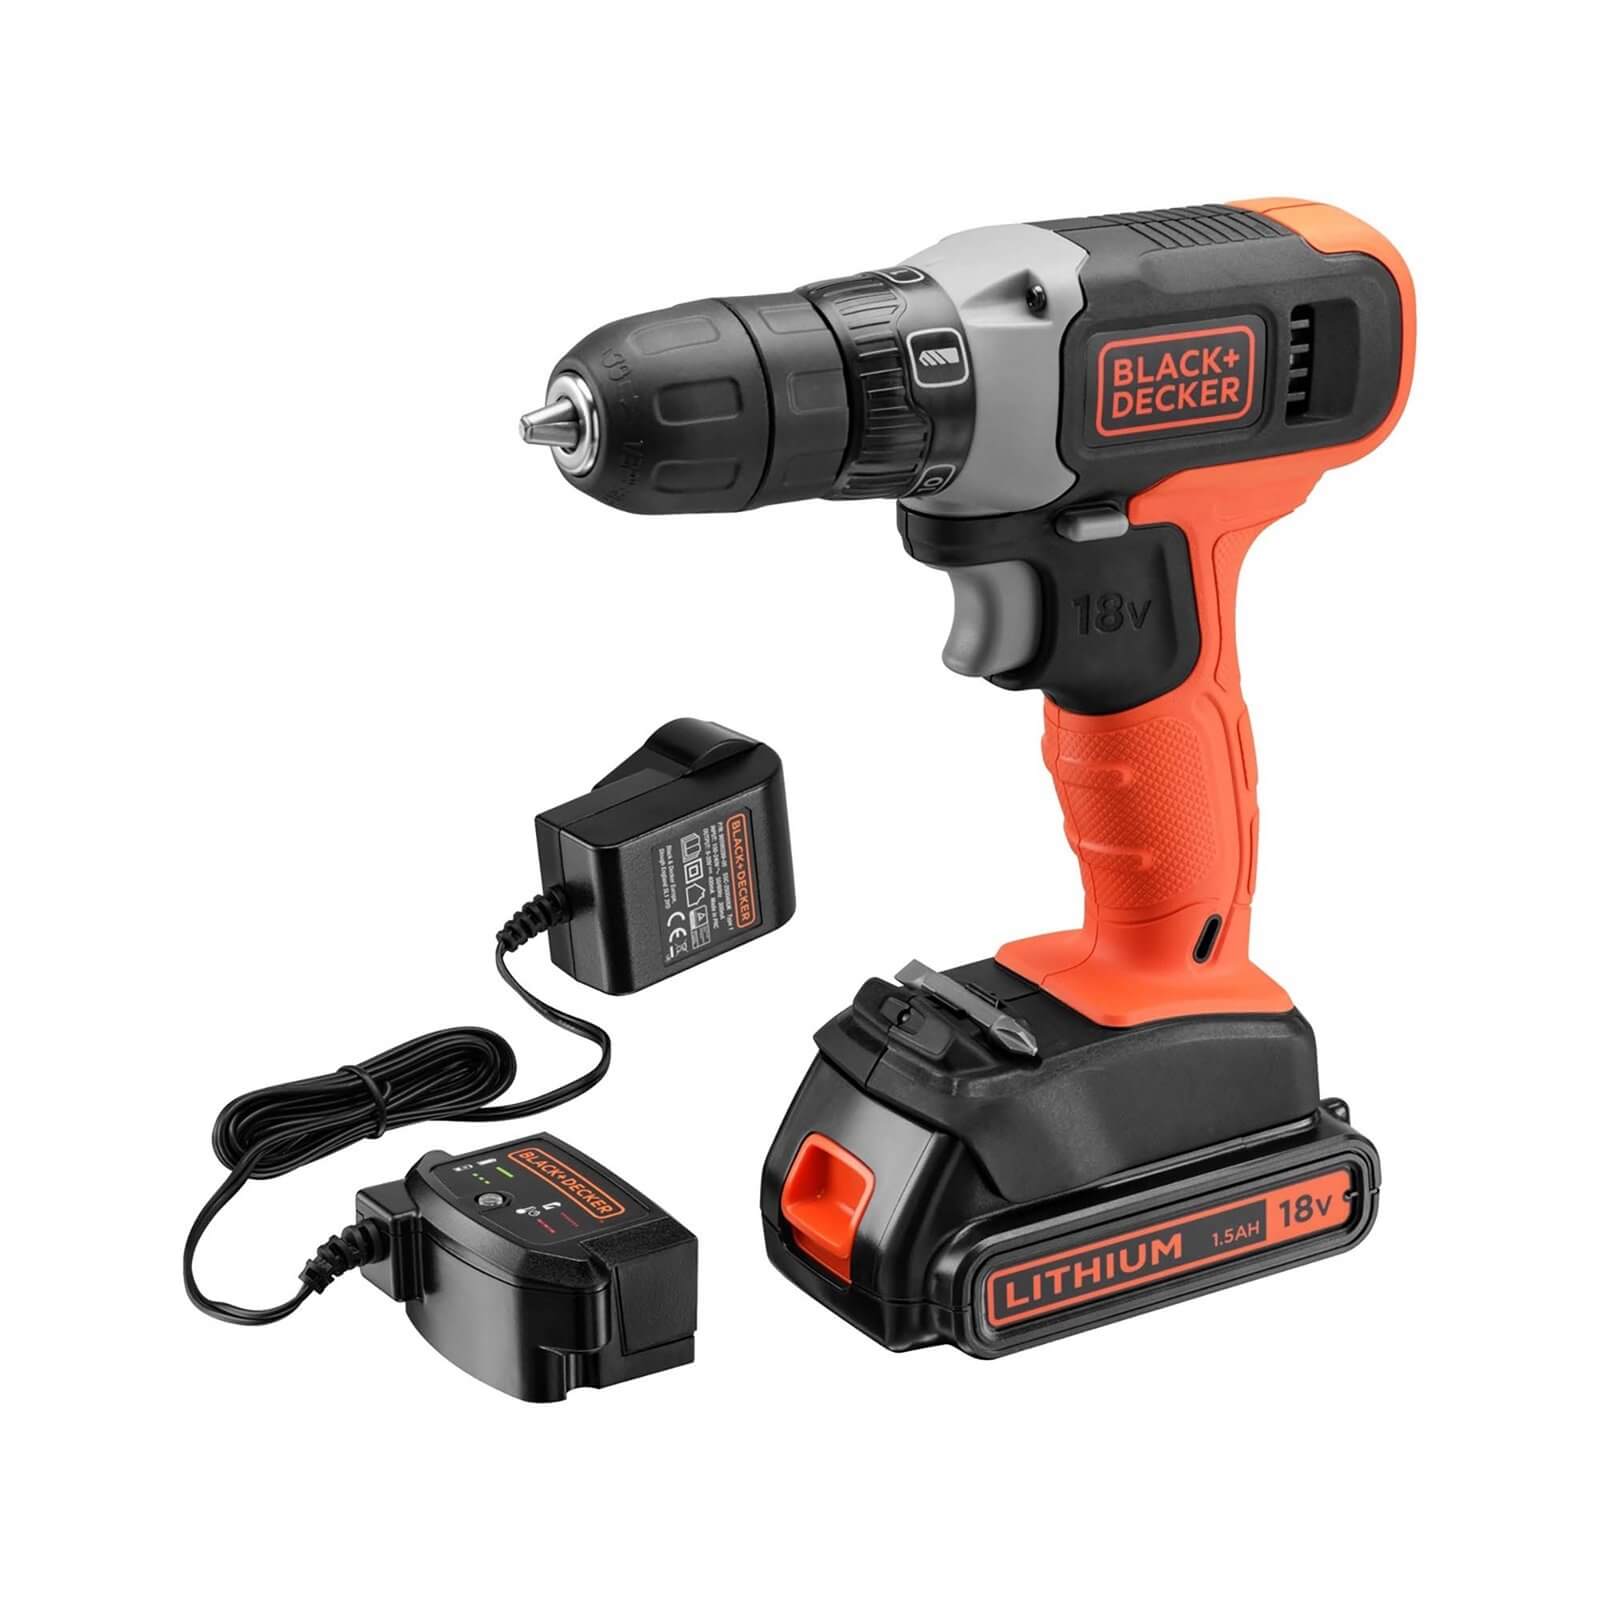 BLACK+DECKER 18V Cordless Drill Driver with Battery and Charger (BCD001C1-GB)